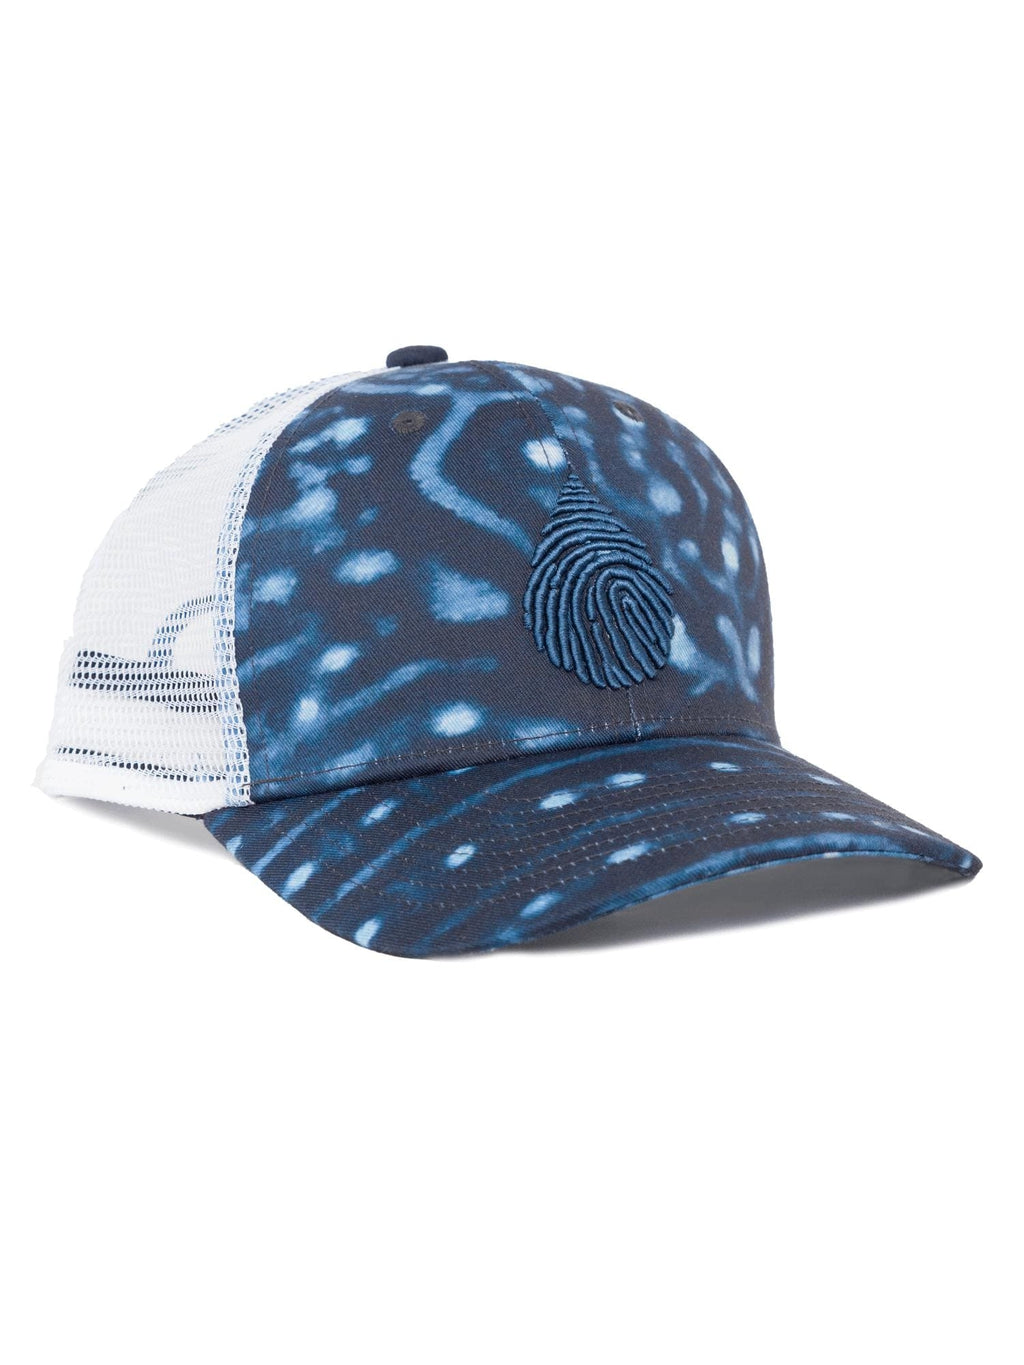 rPET Recycled 100% Polyester Sublimation Bucket Hat W/ Adjustable  Drawstring - BHDS140-R - Swag Brokers